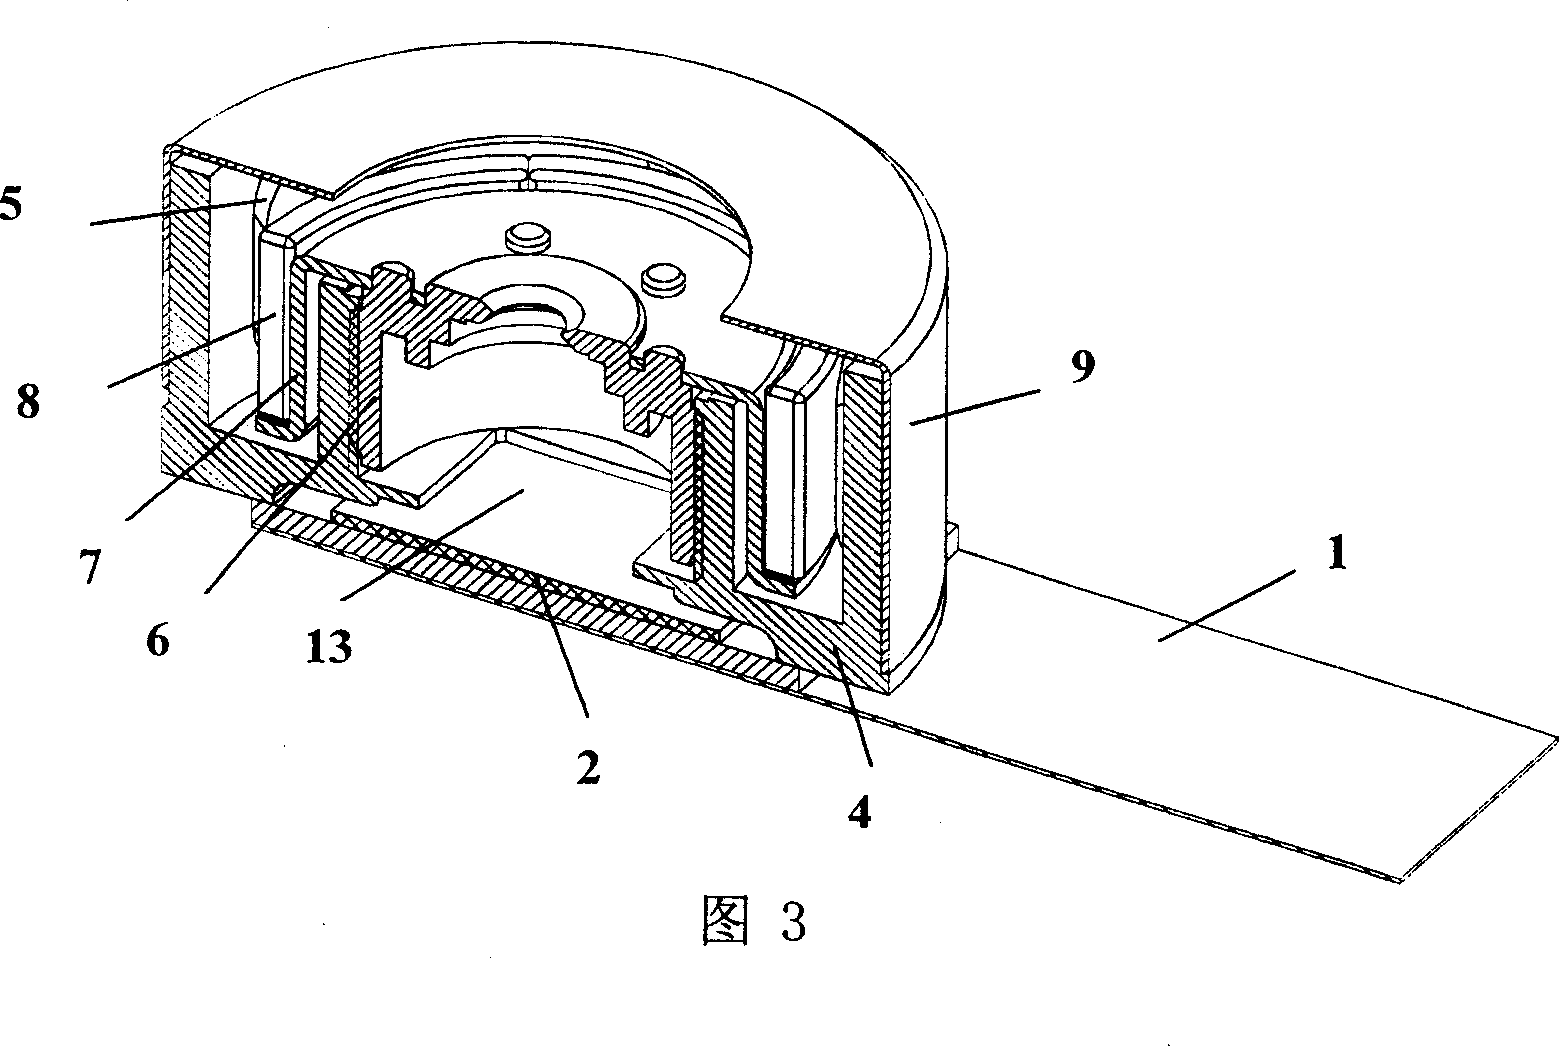 Photographic camera focusing device for mobile phones